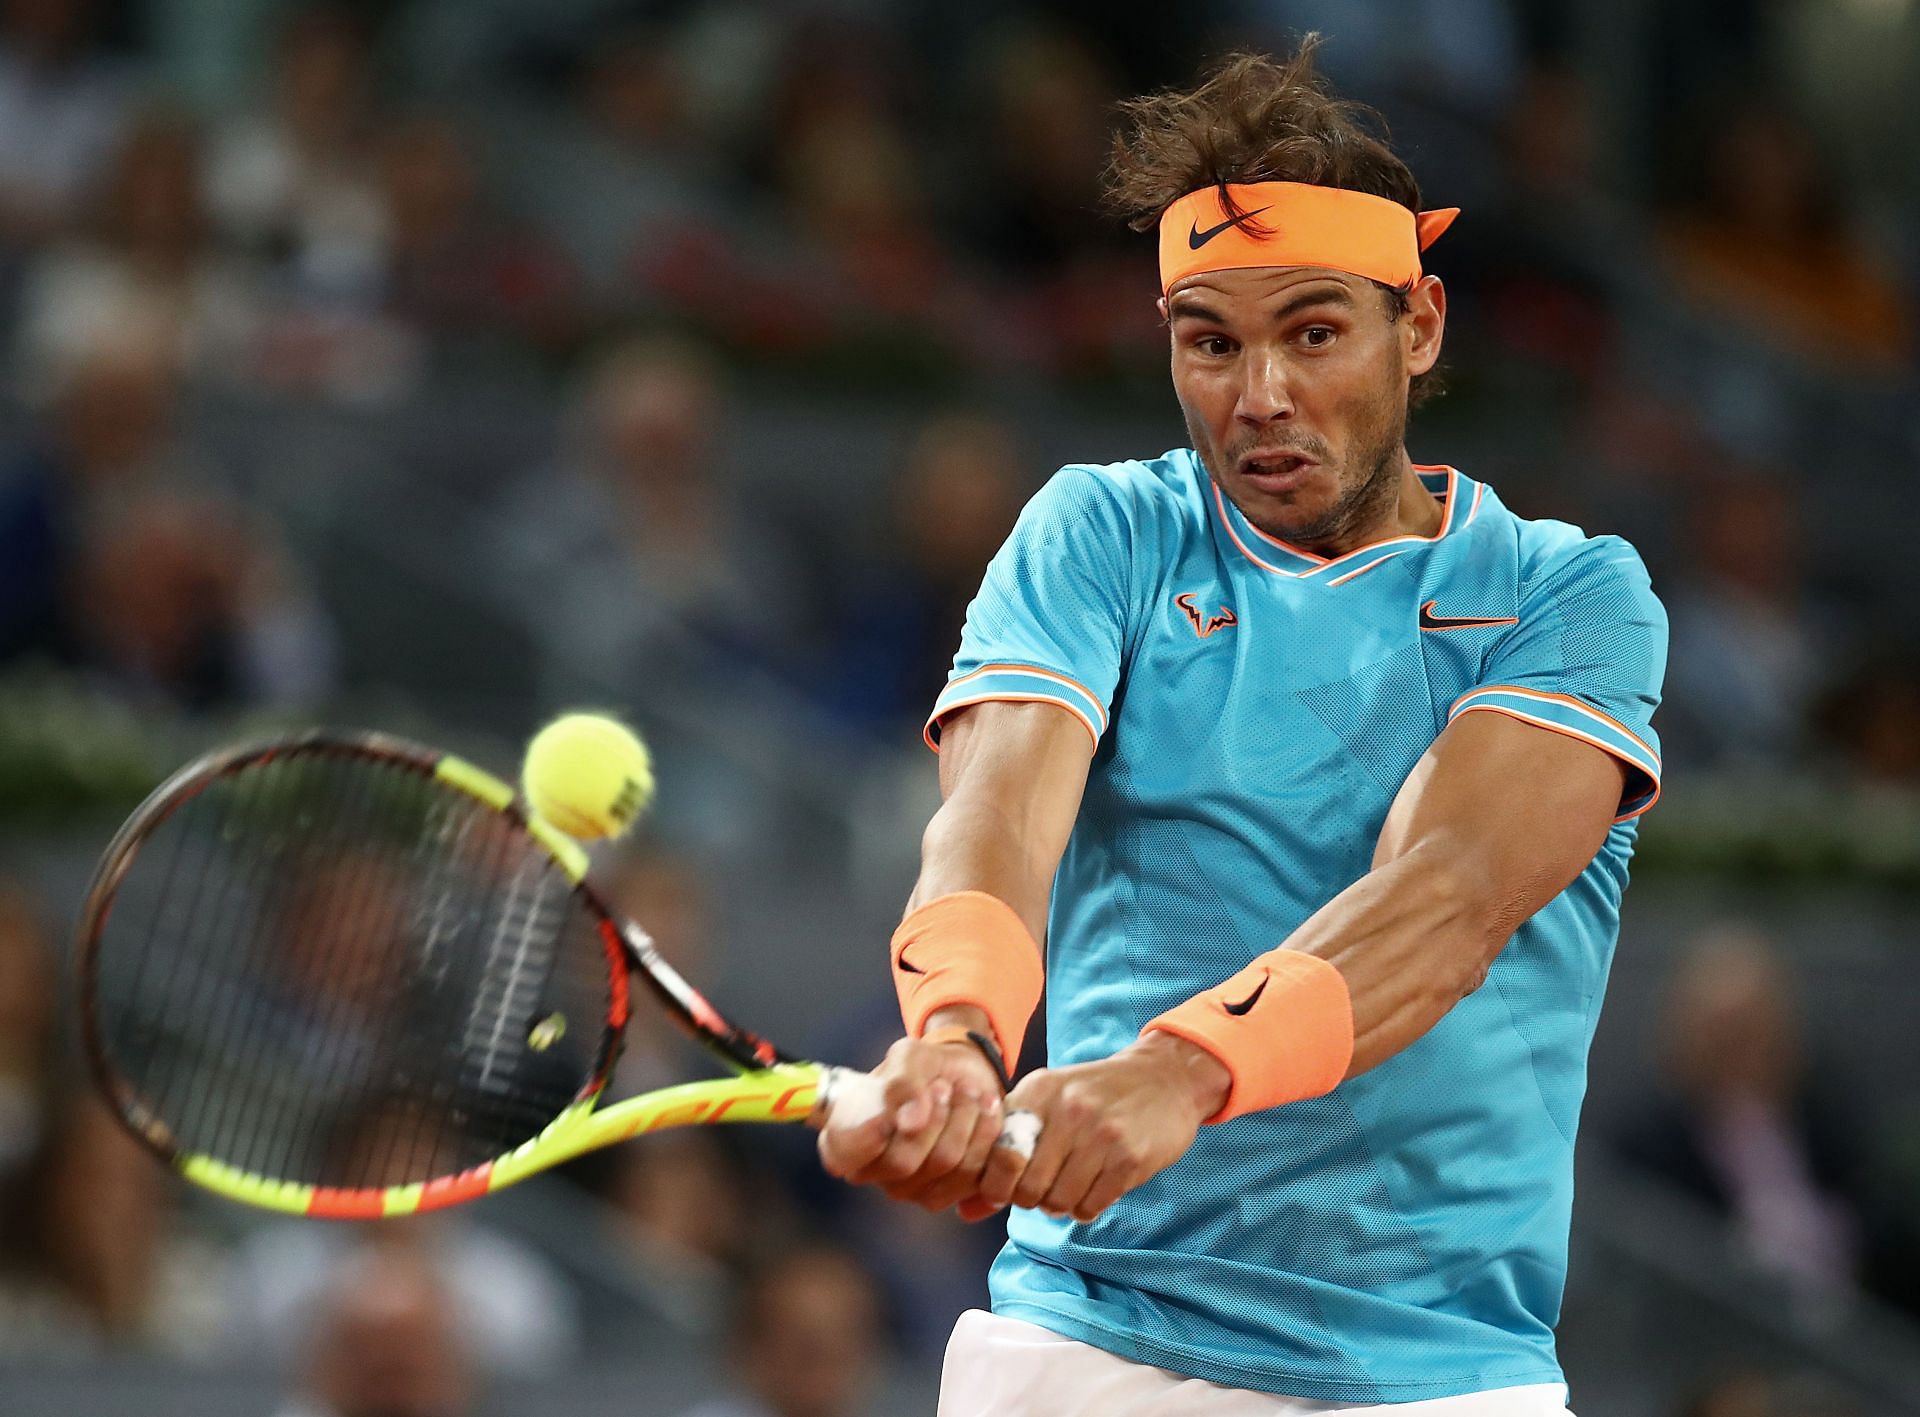 Rafael Nadal in action against Stefano Tsitsipas at the 2019 Madrid Open semifinal